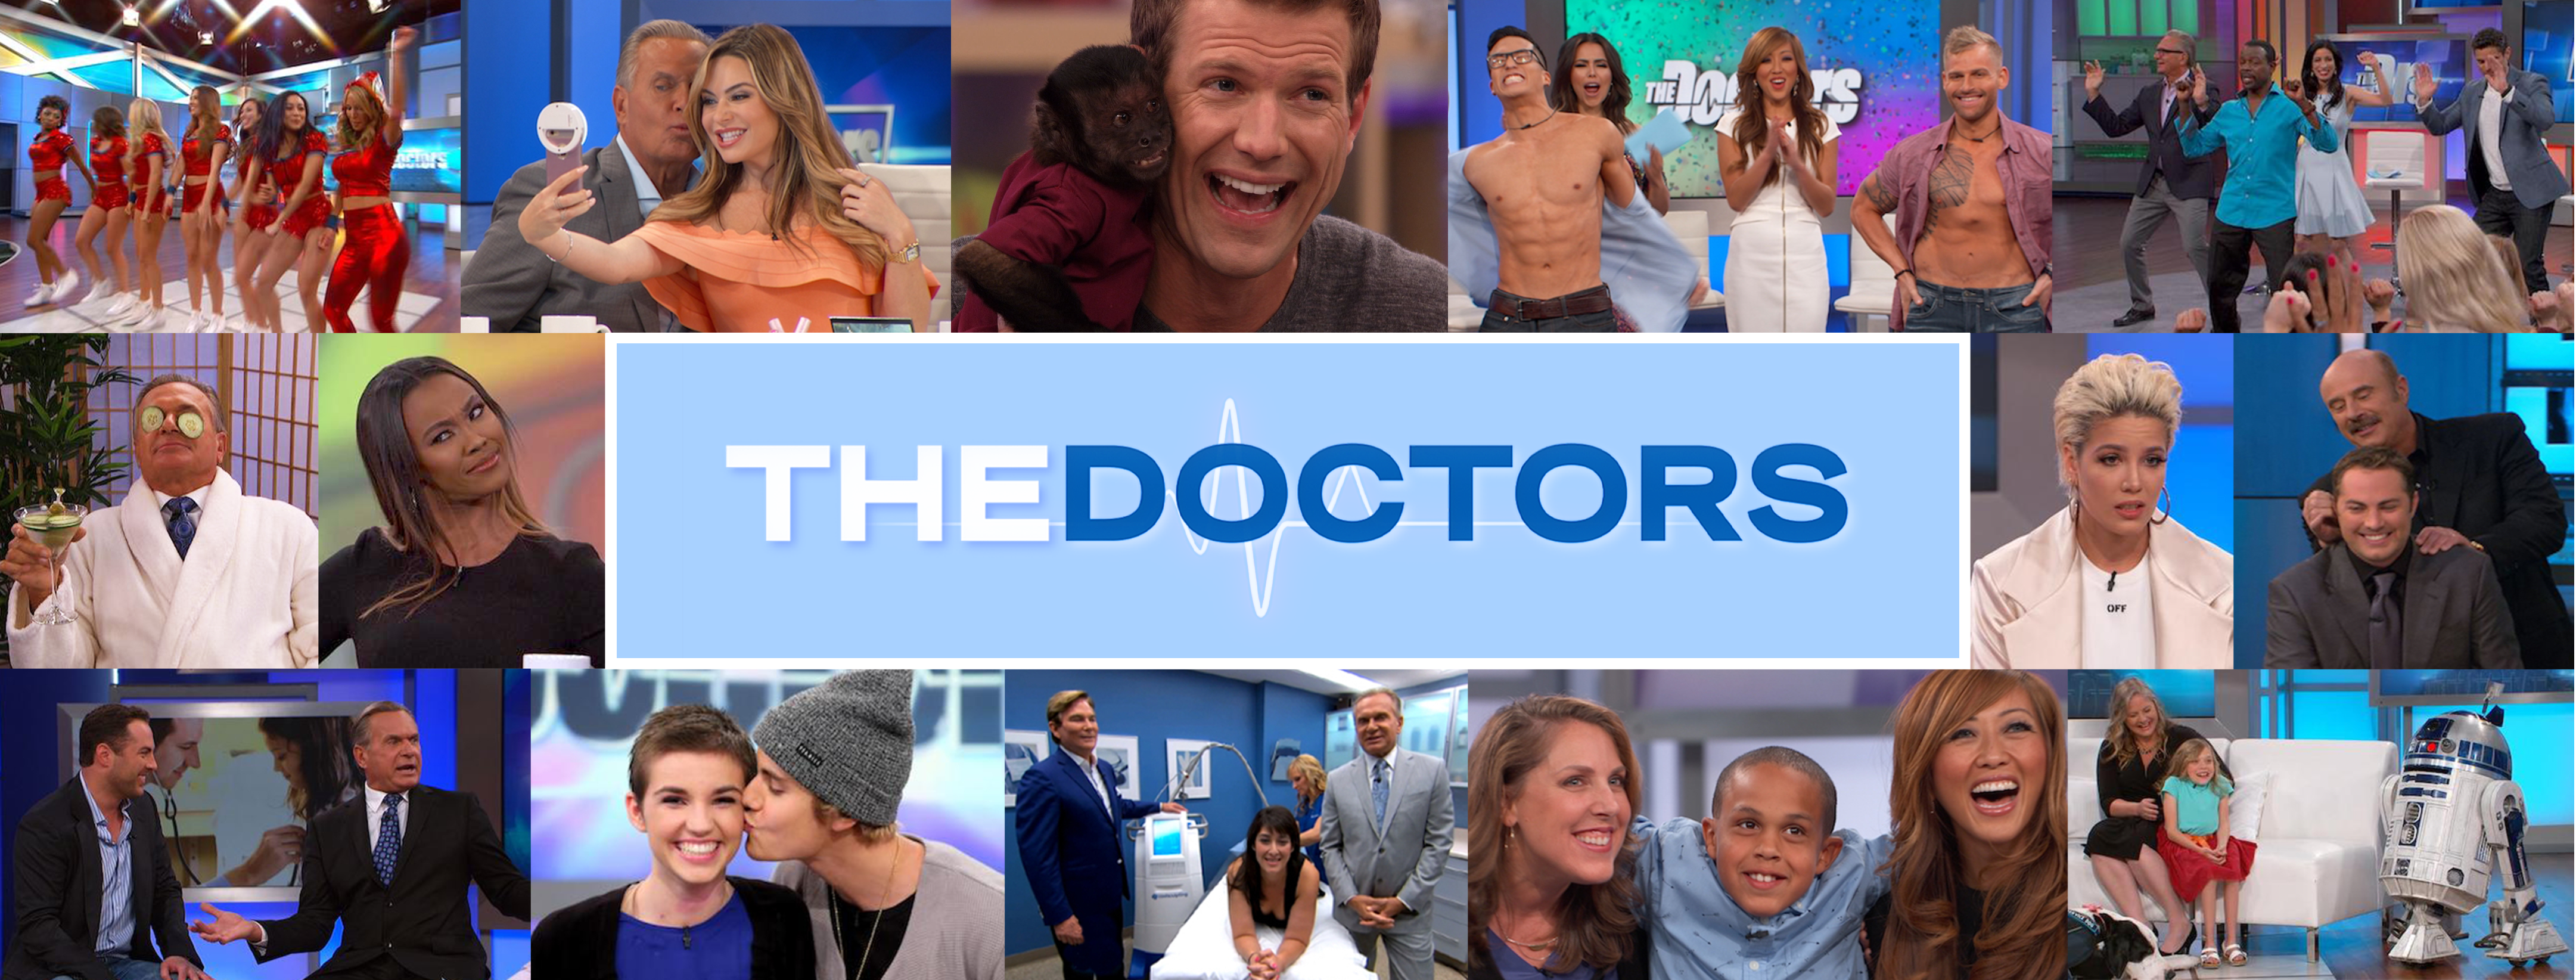 Urinary Tract and Bladder Infections | The Doctors TV Show